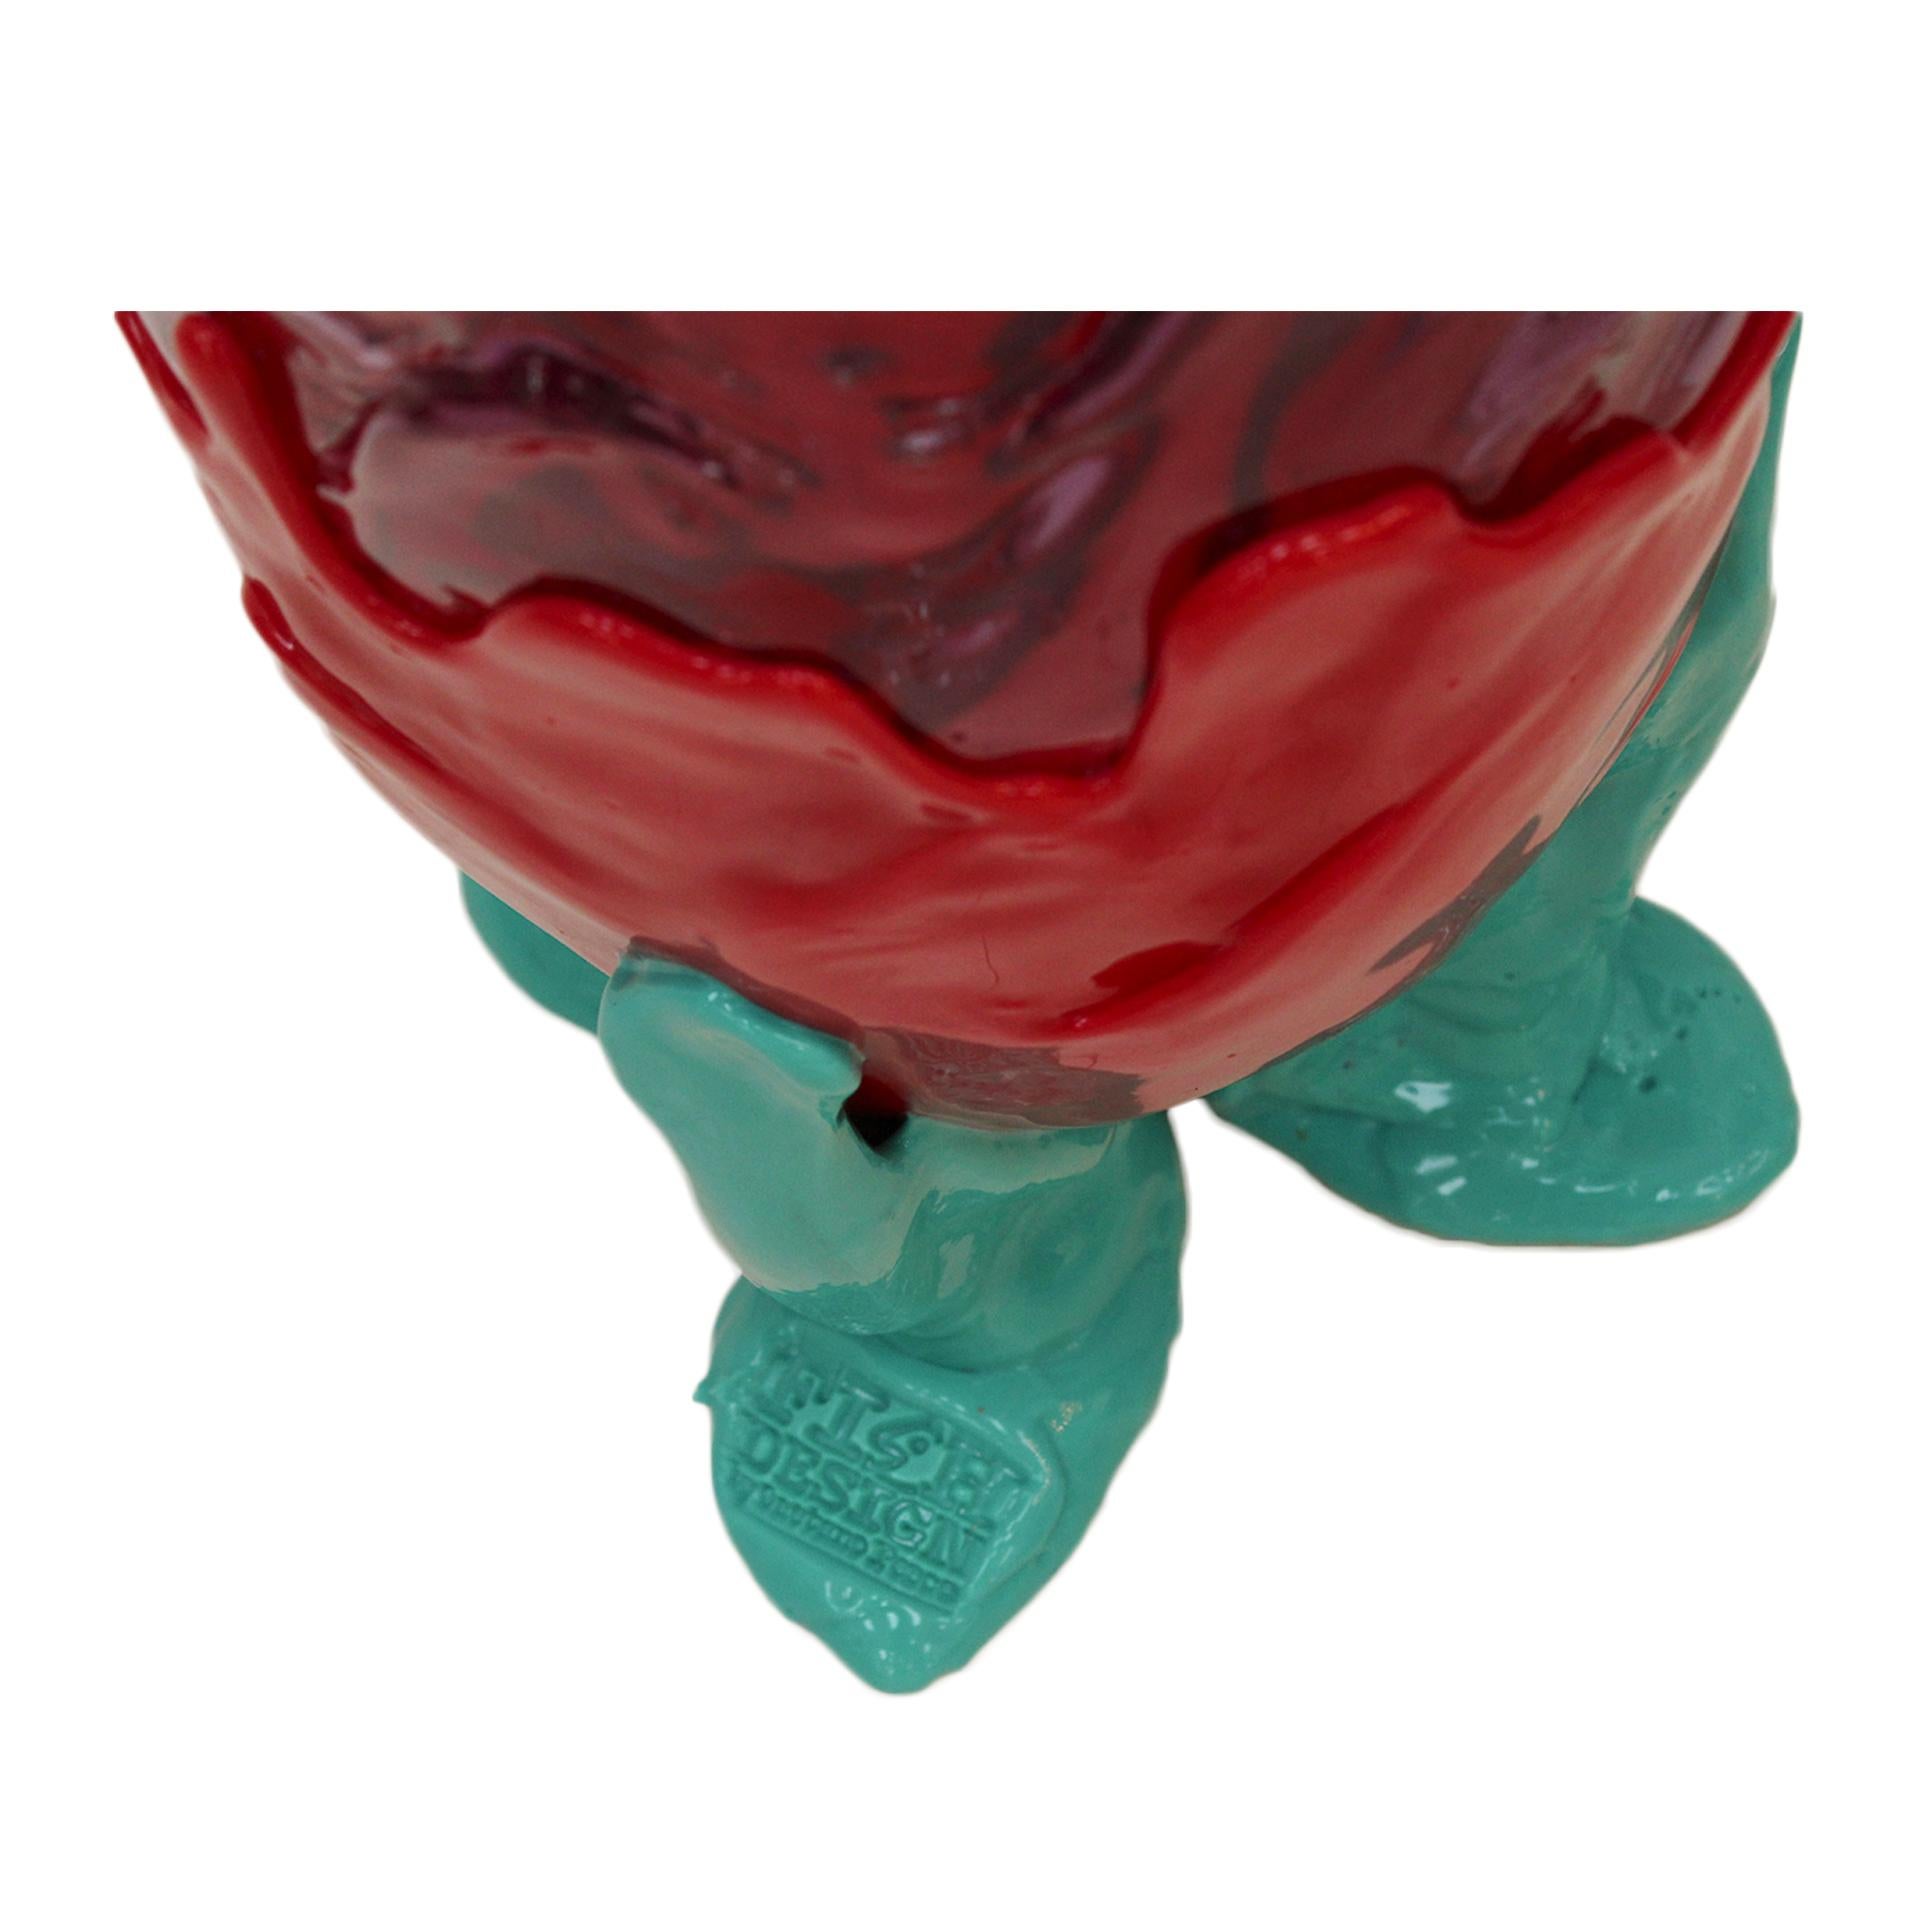 Italian Arty Vase Designed By Gaetano Pesce and Made of Colored Resin For Sale 1